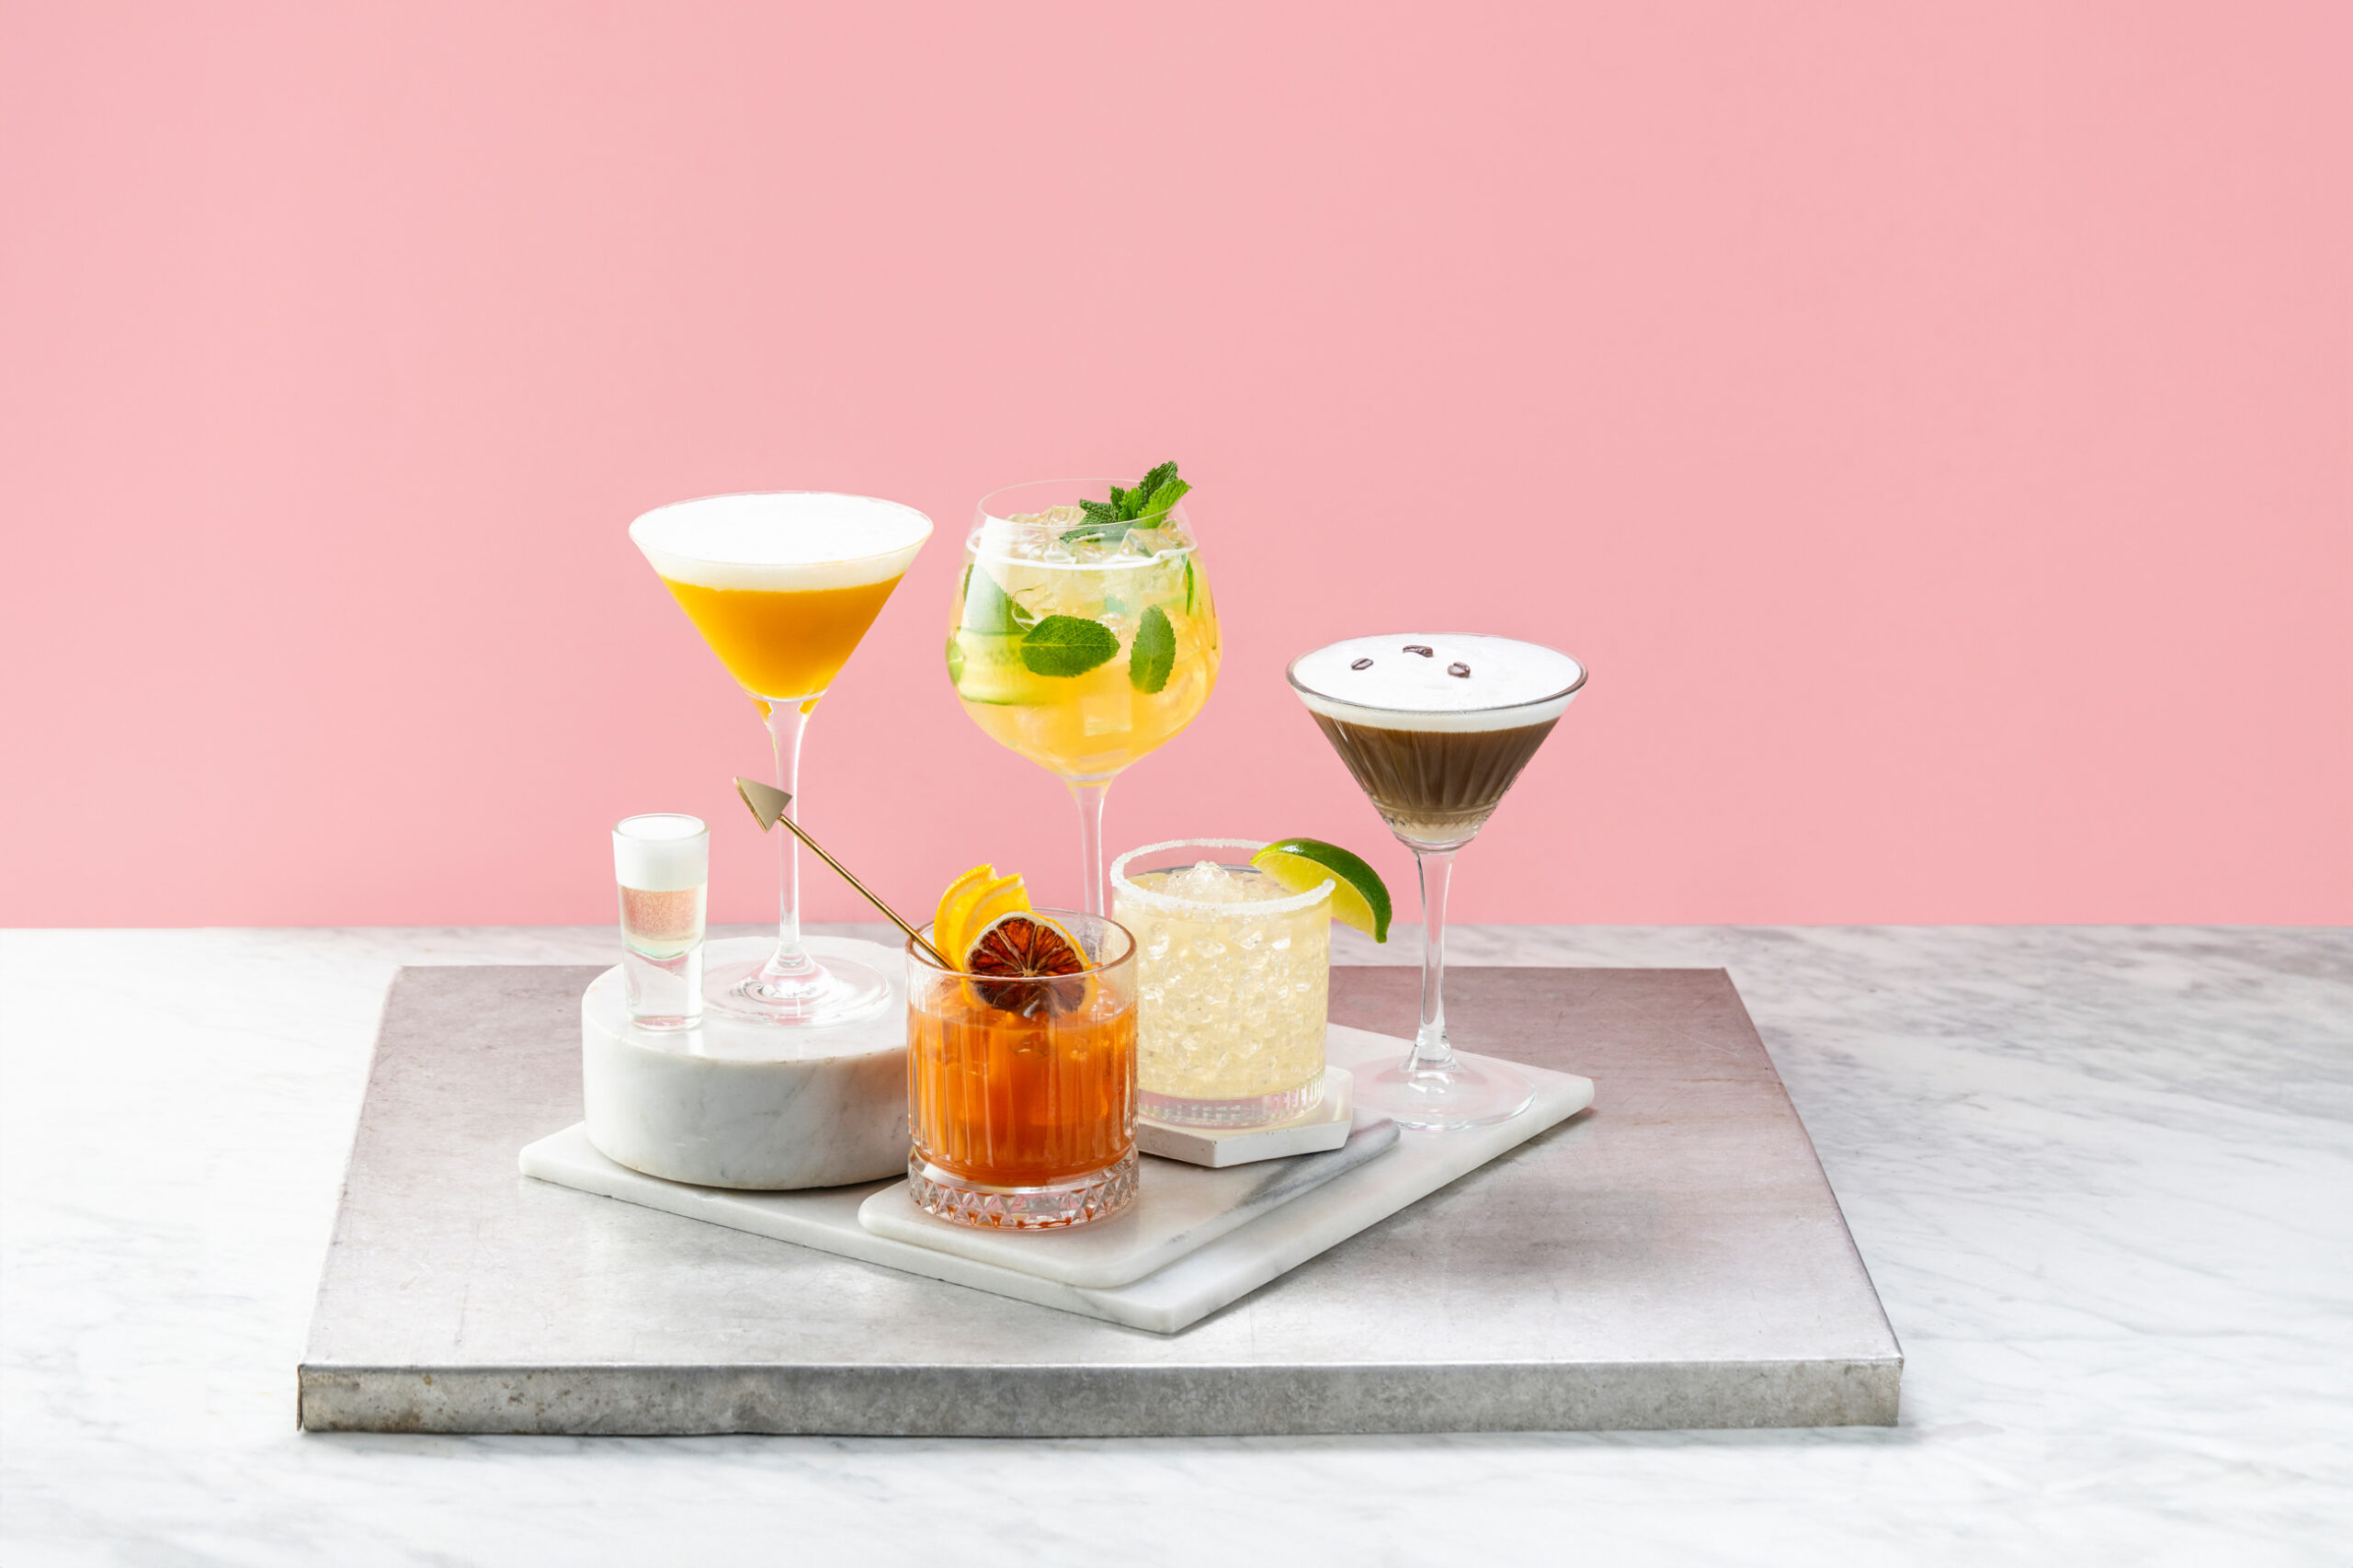 https://www.drakeandmorgan.co.uk/the-parlour/wp-content/uploads/2020/07/Cocktail-Grp-002-scaled.jpg